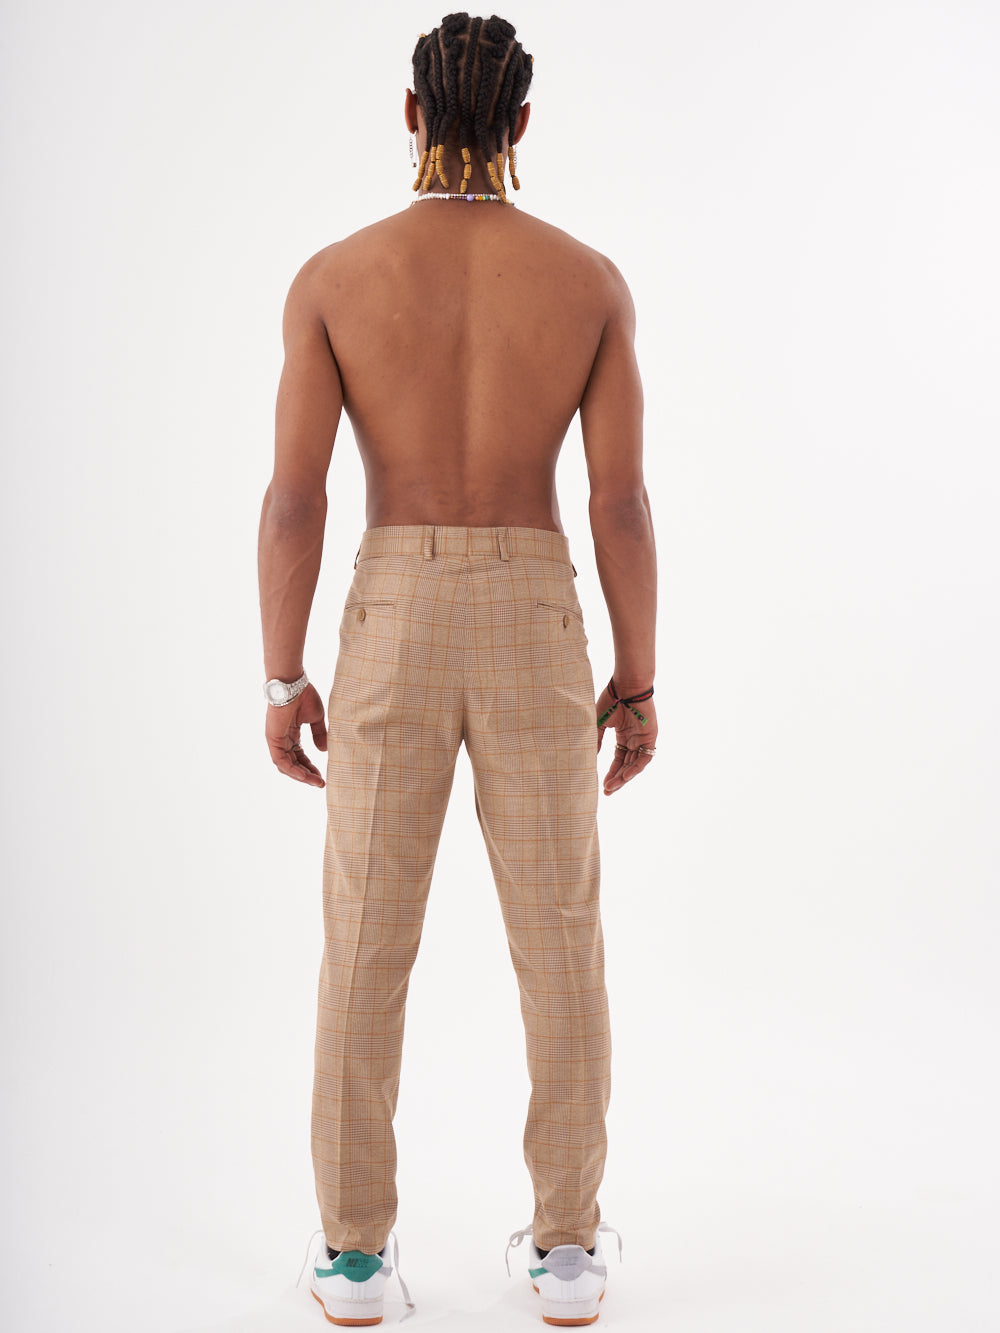 The back view of a man wearing Barot pants.